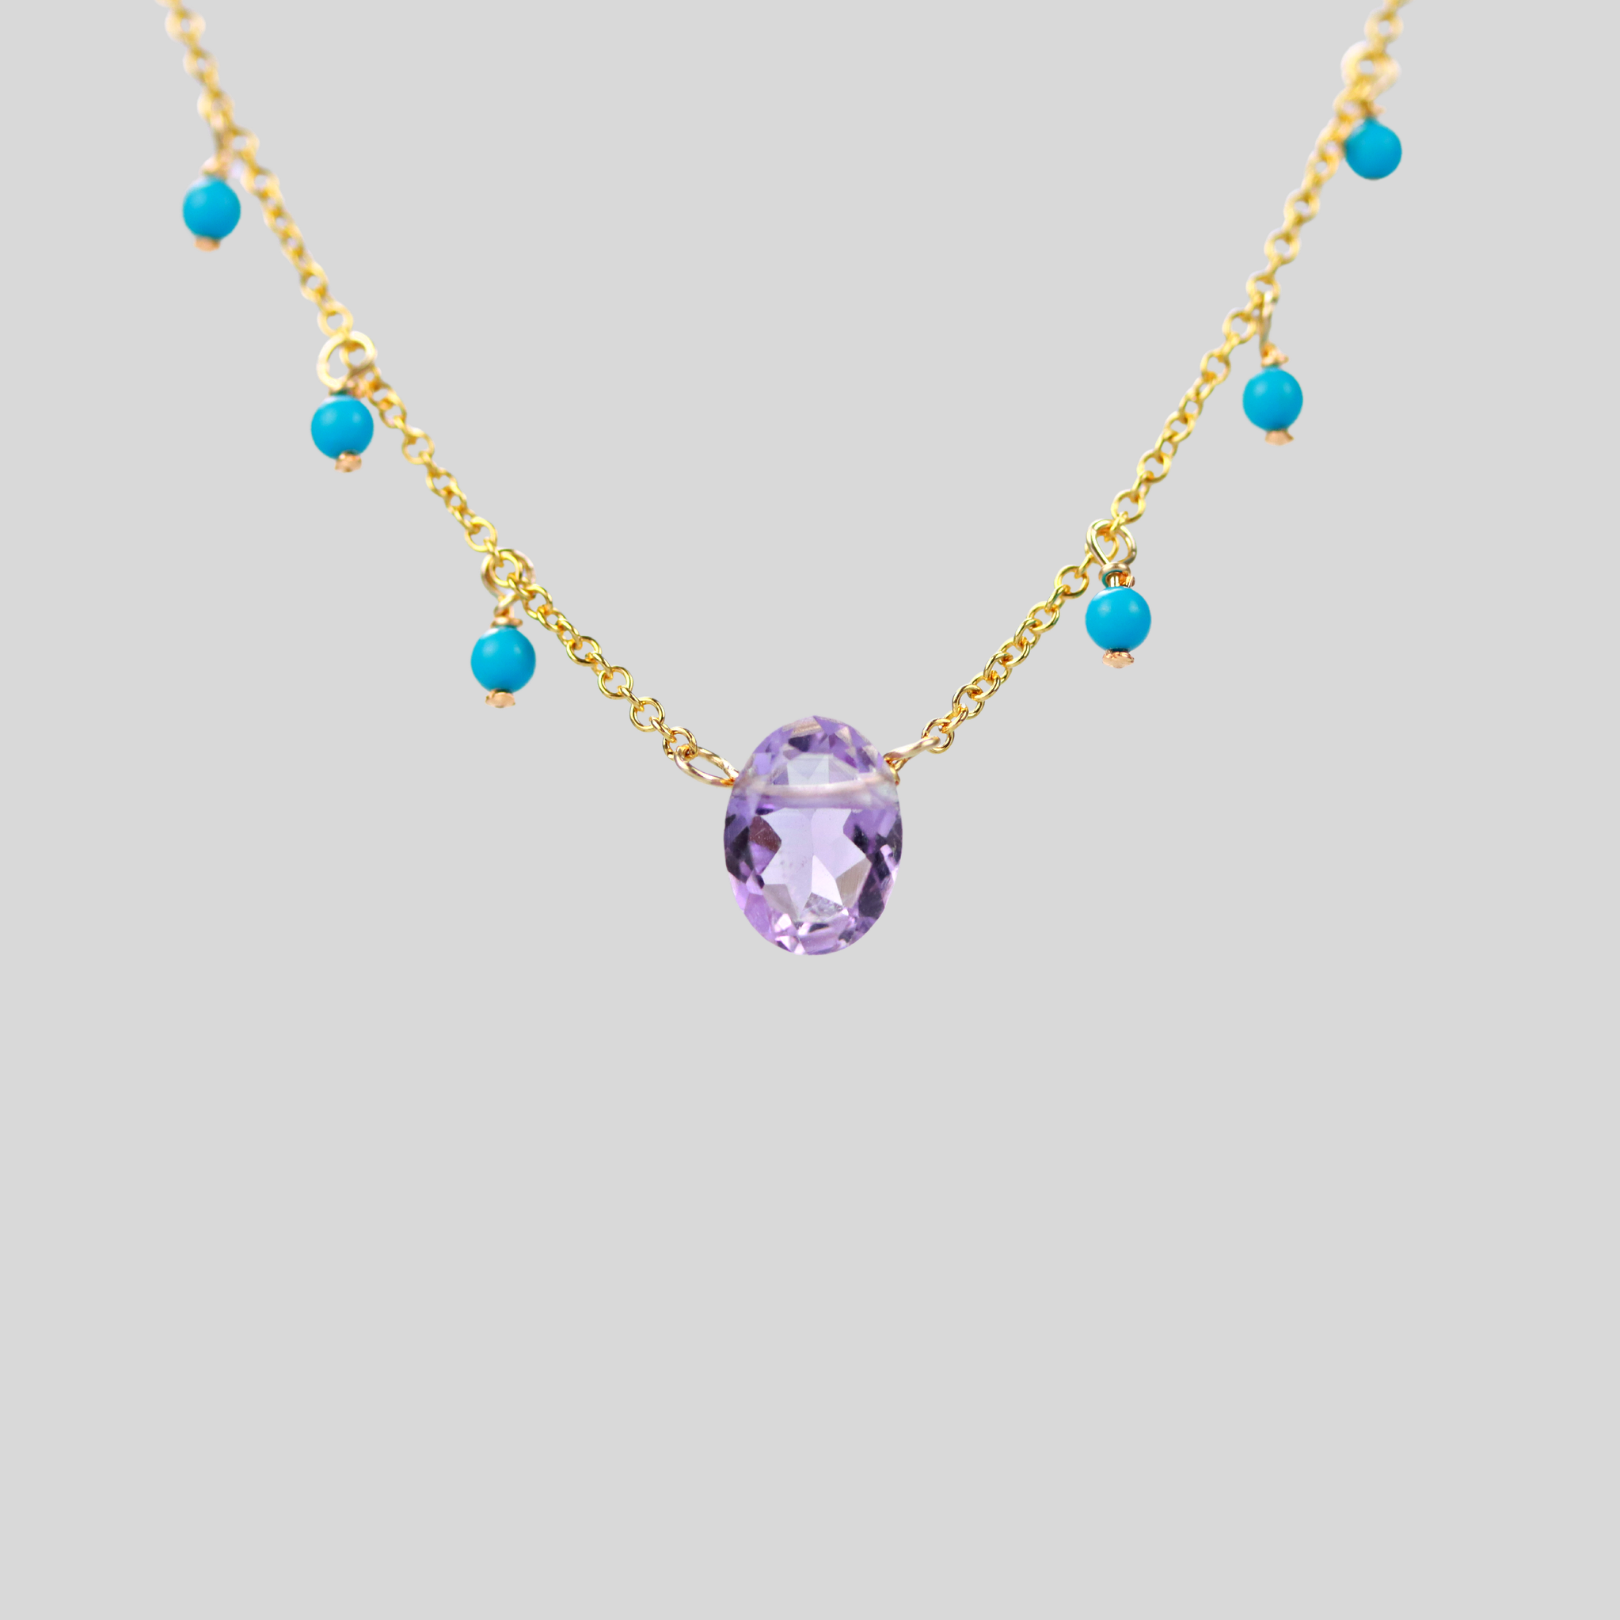 Oval amethyst and turquoise necklace